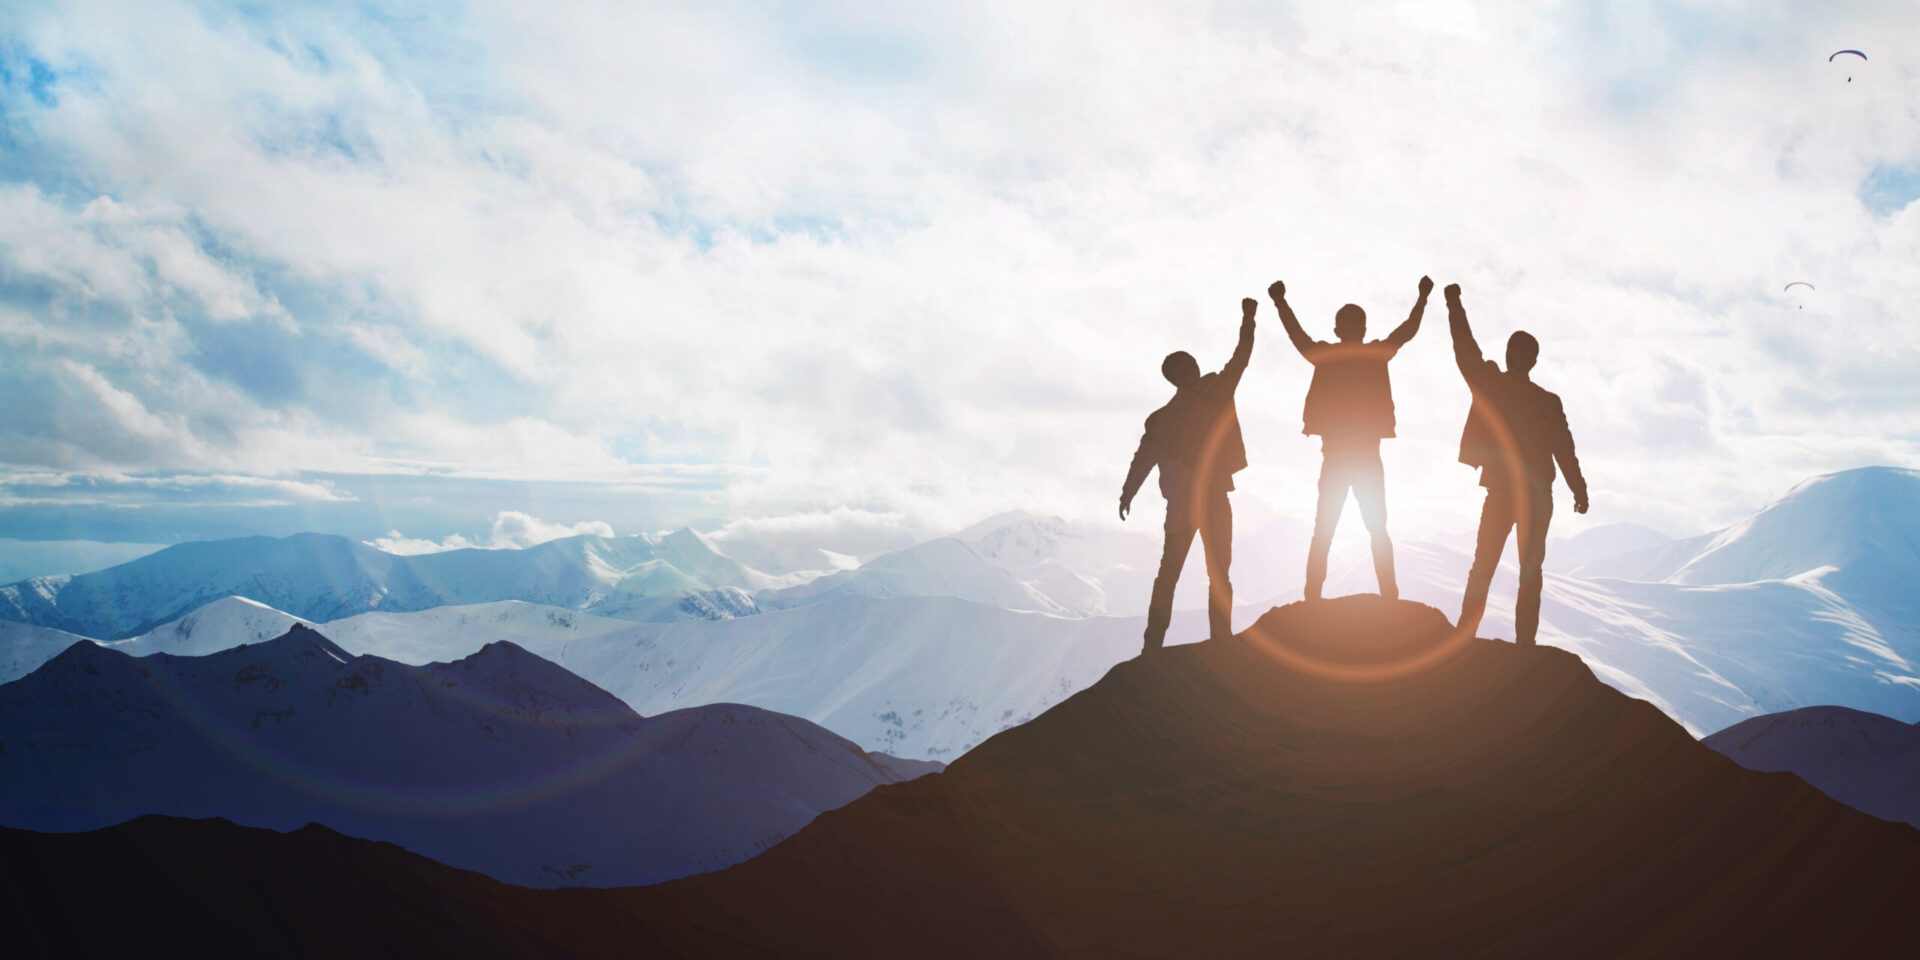 Photo of three people standing on a mountain holding their hands up